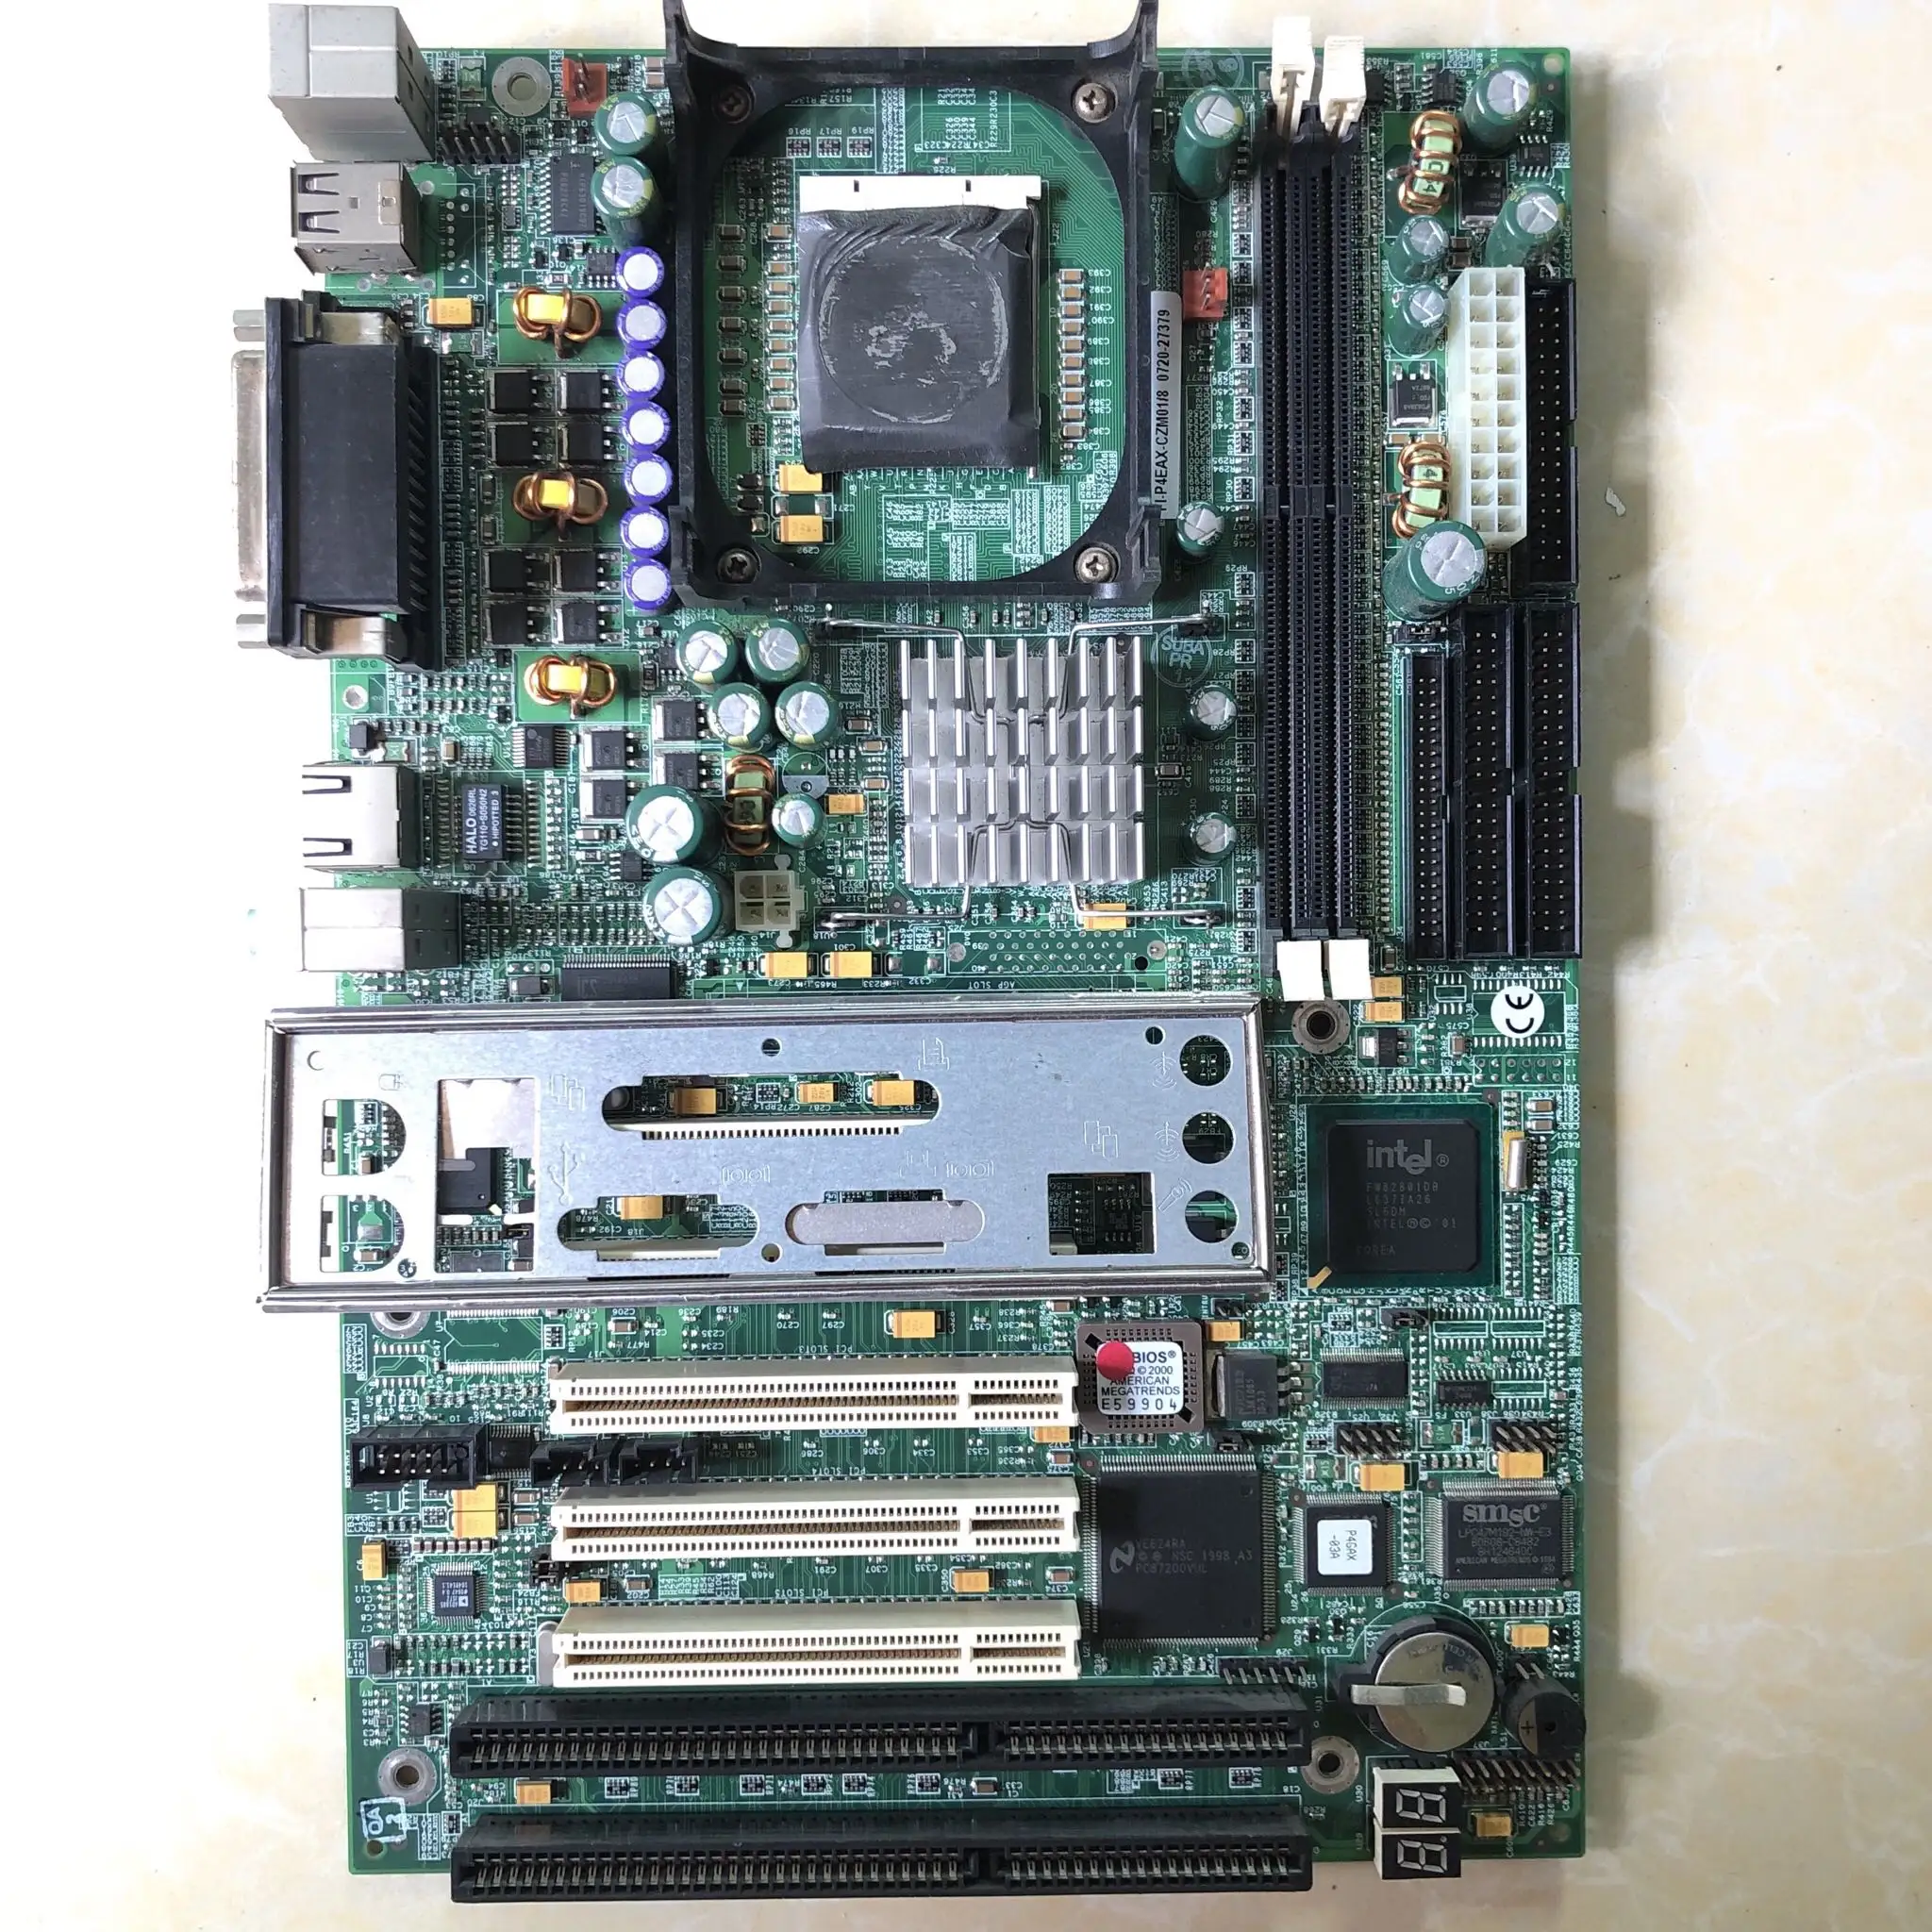 model FI-P4EAX-CZM01/8 socket 478 ddr400 motherboards with 2 ISA slot and 1 LAN run winxp win98 dos 6.22 linux system